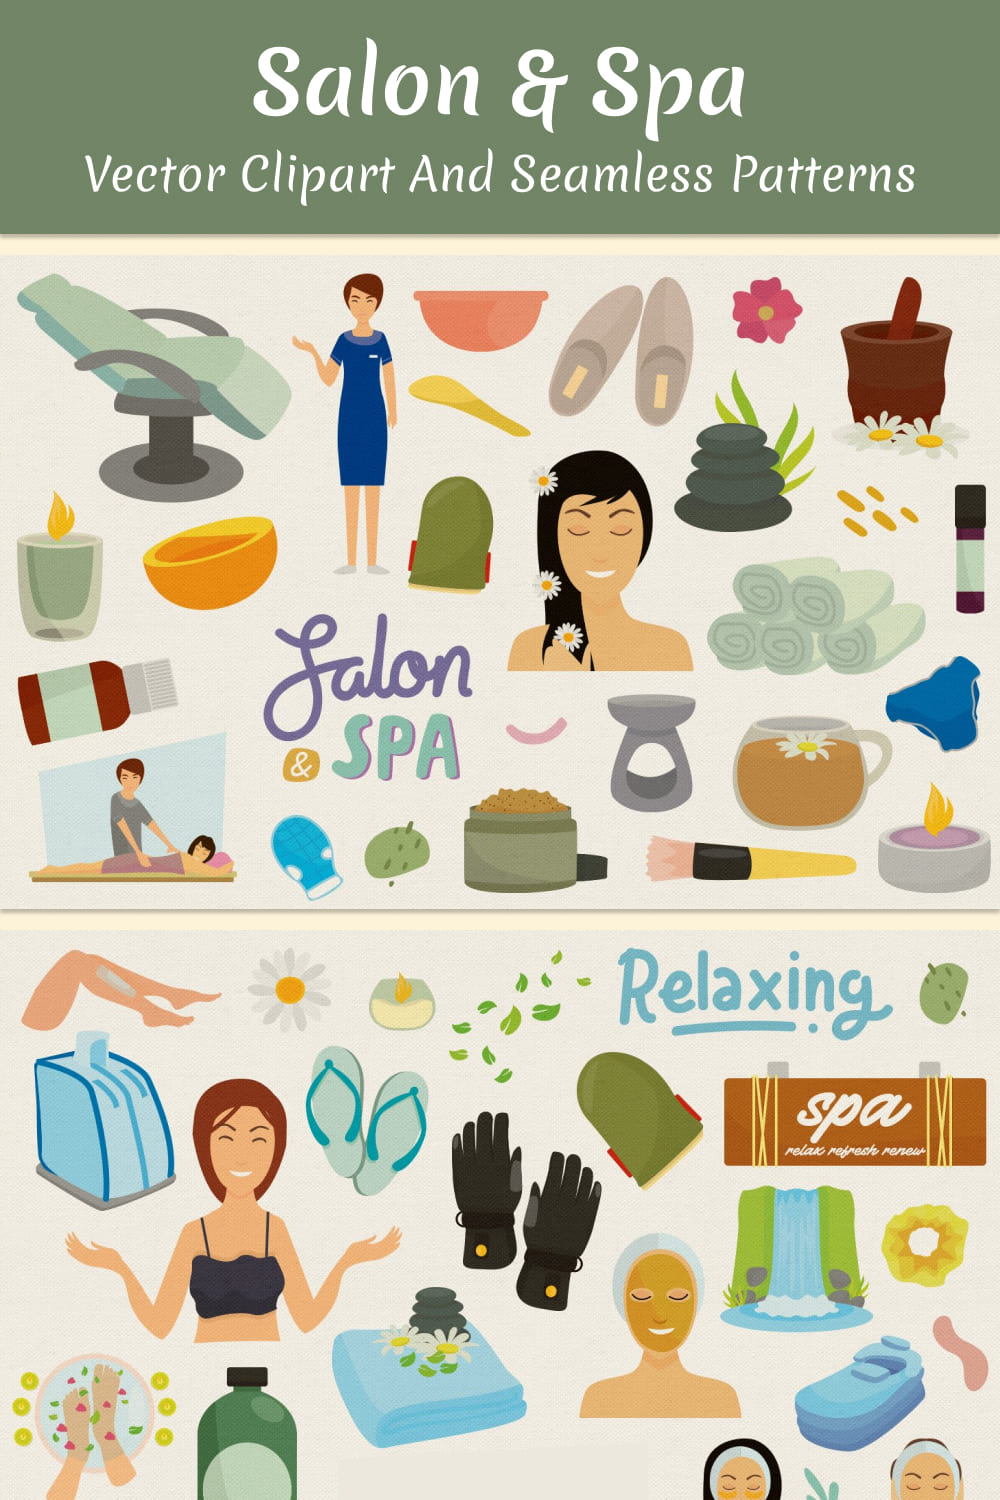 Salon spa vector clipart and seamless patterns - pinterest image preview.